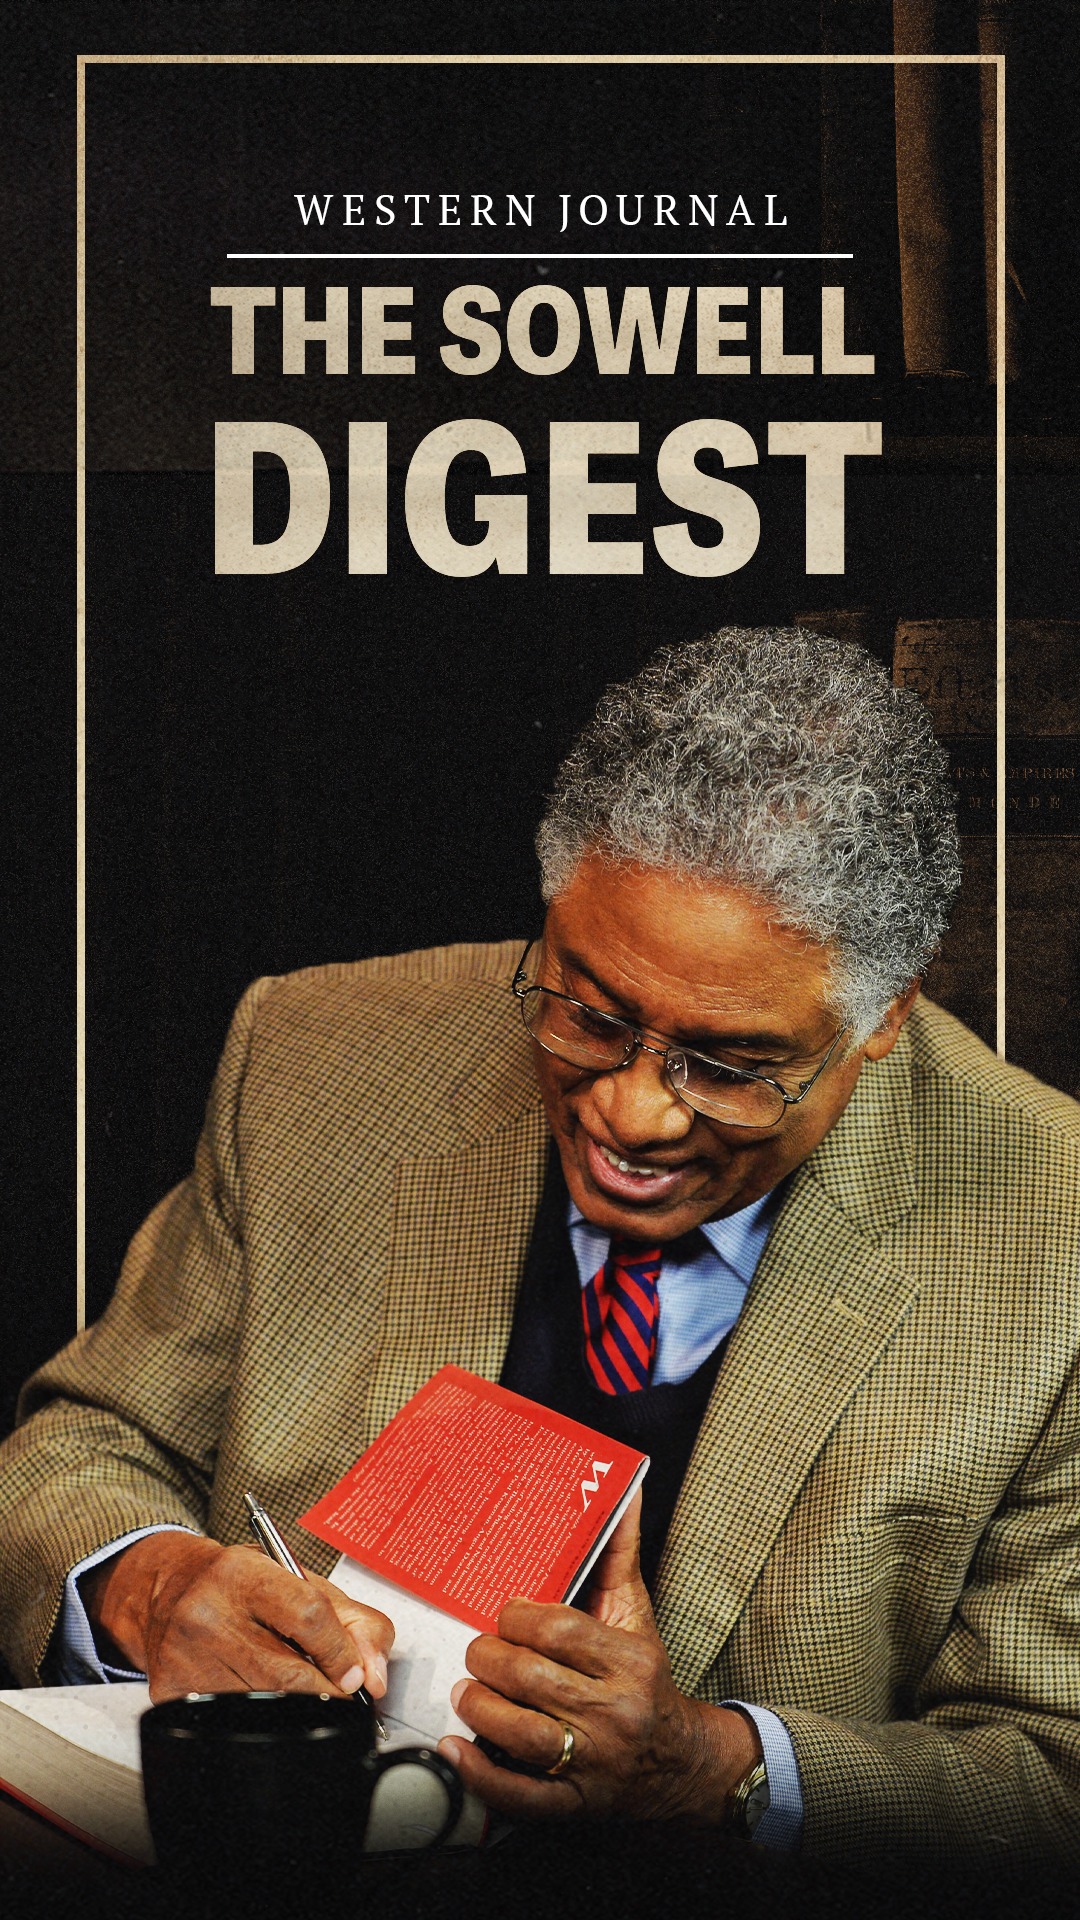 The Sowell Digest